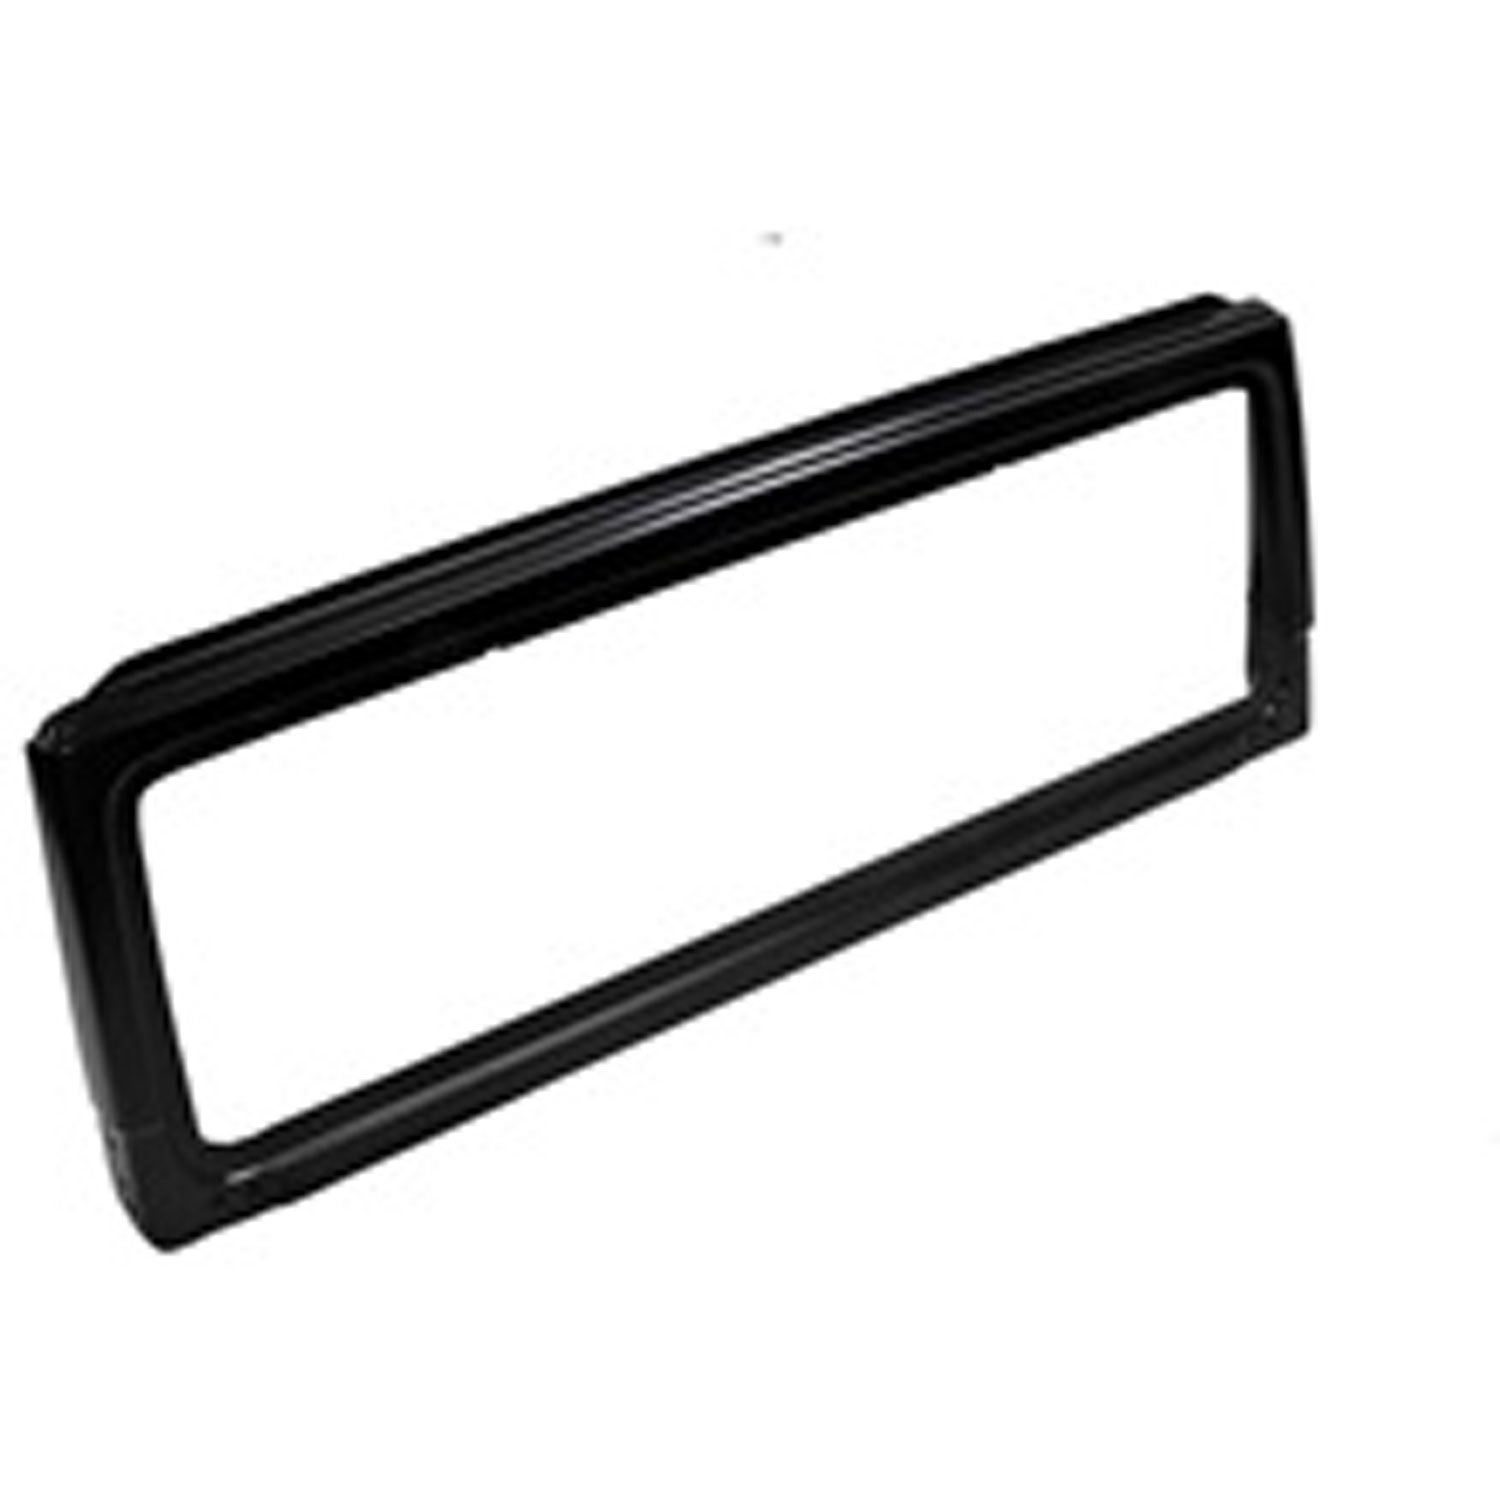 Replacement windshield frame from Omix-ADA, Fits 97-02 Jeep Wrangler TJ